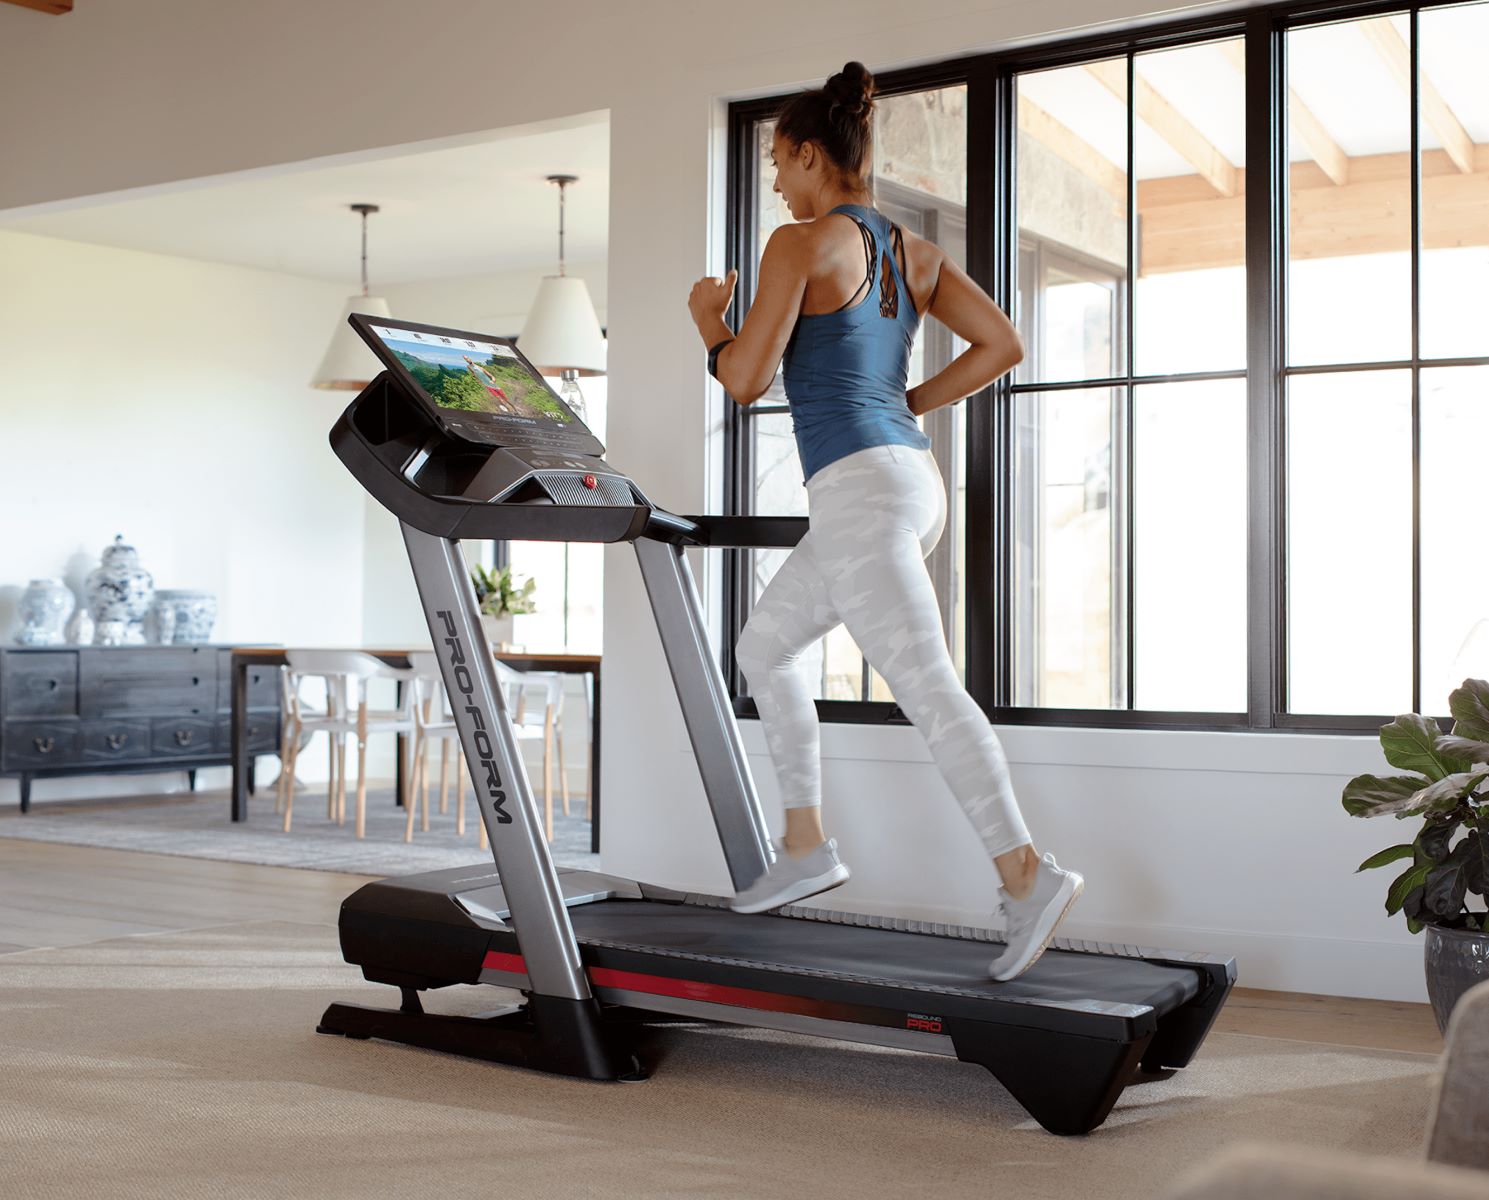 How Do I Activate My Treadmill Without IFit